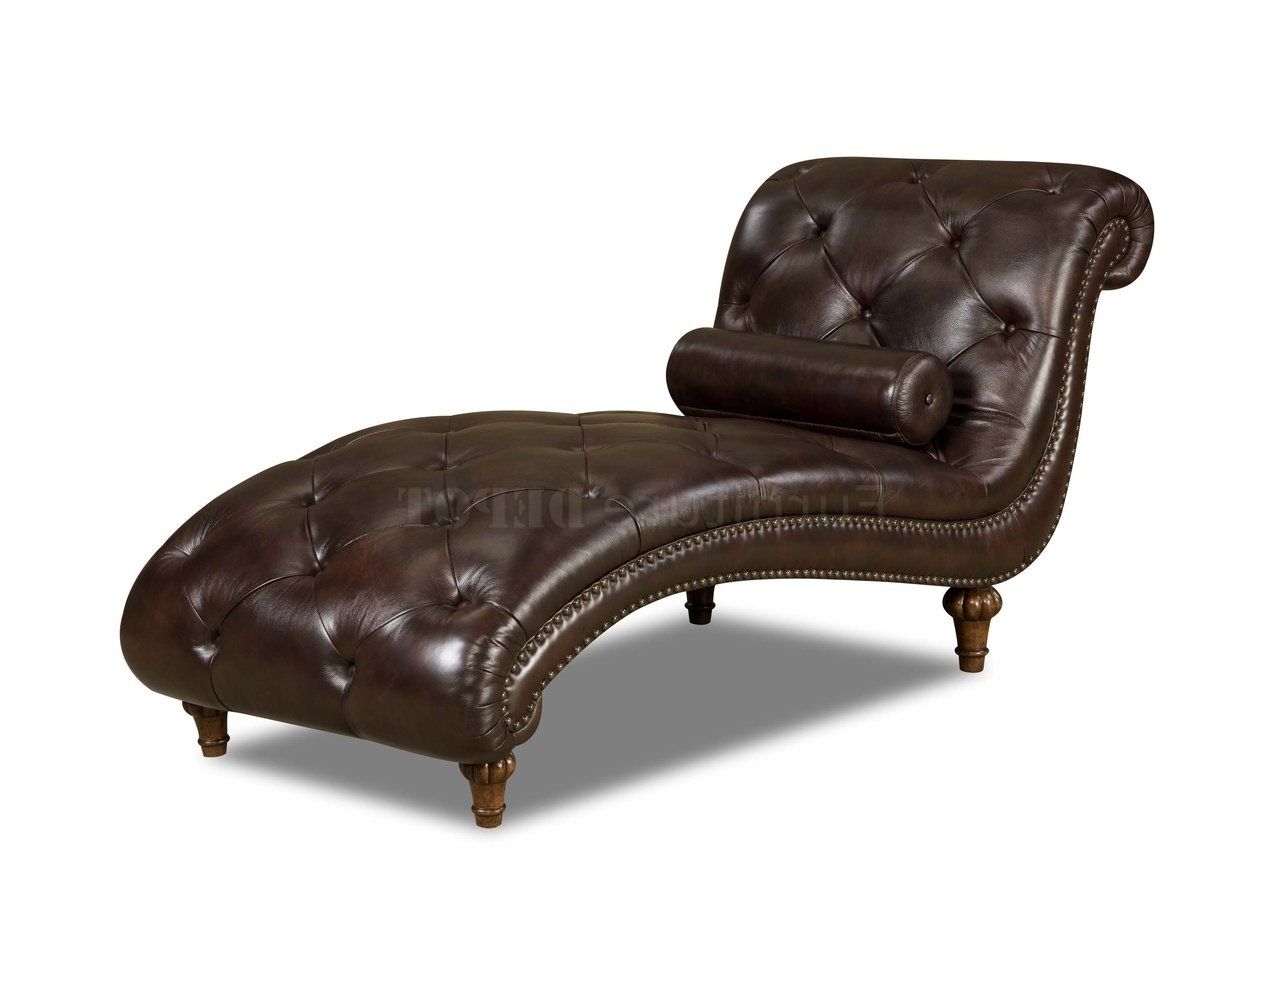 Tufted Leather Chaises Pertaining To Most Recently Released Tufted Leather Chaise Lounge Chair • Lounge Chairs Ideas (View 1 of 15)